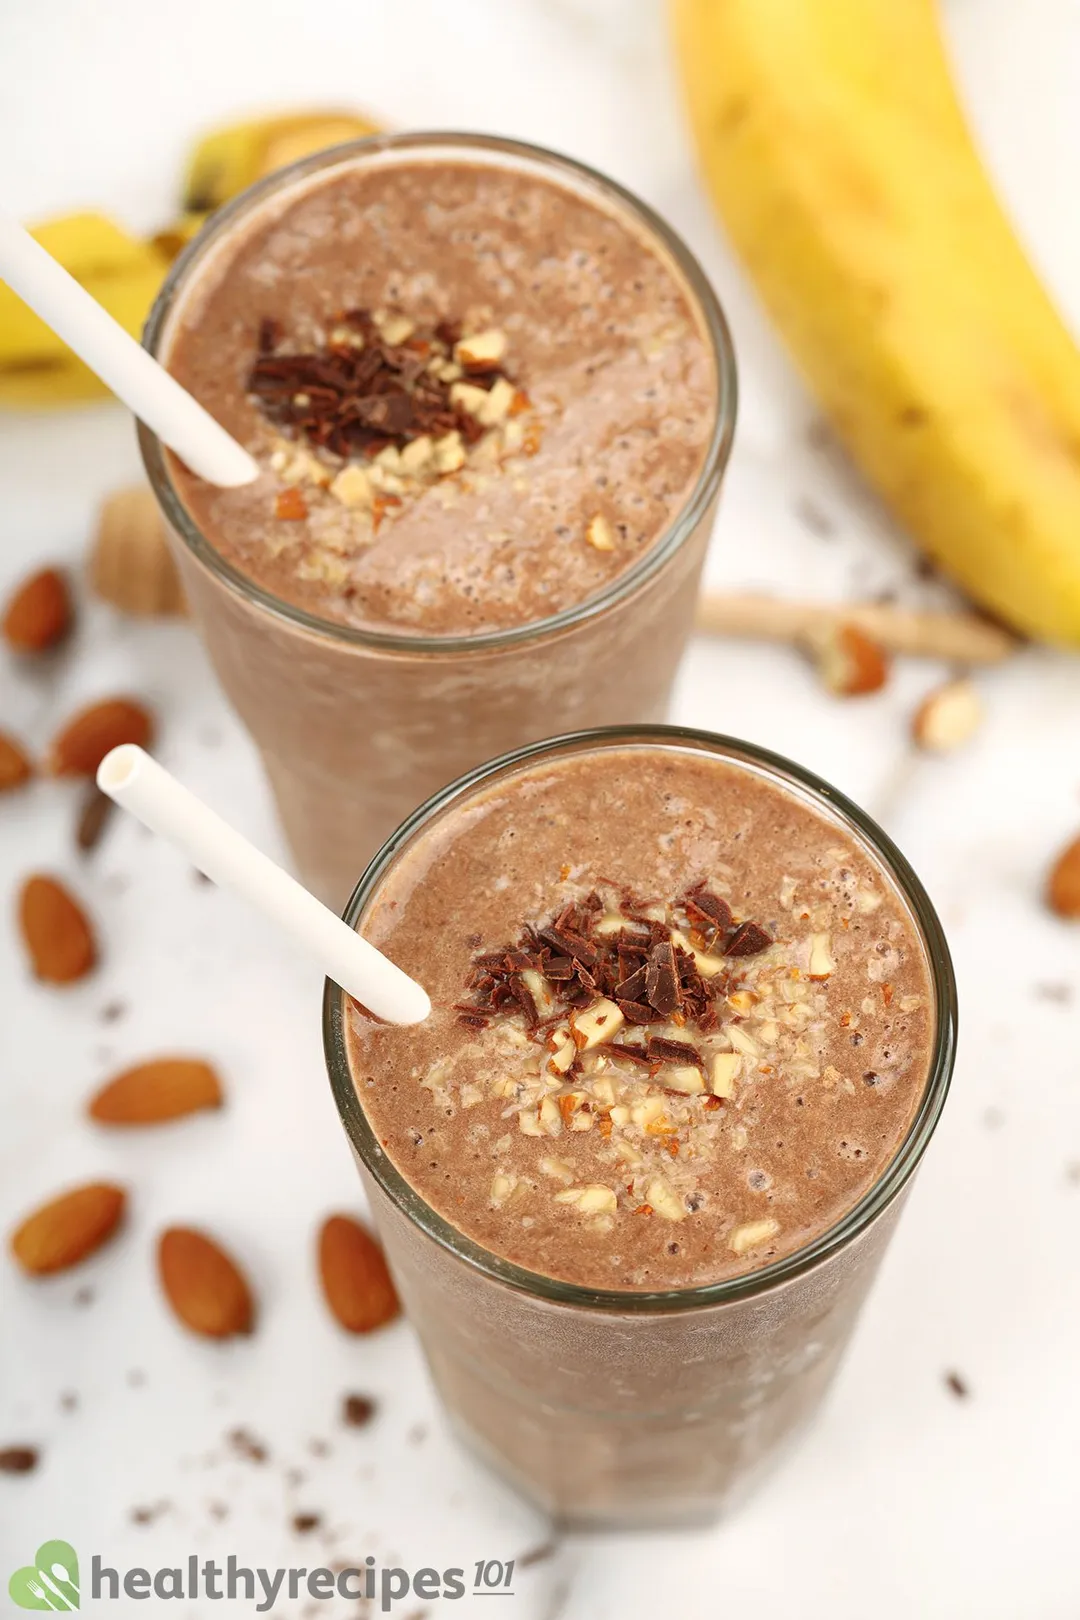 Two glasses of chocolate peanut butter banana smoothie.